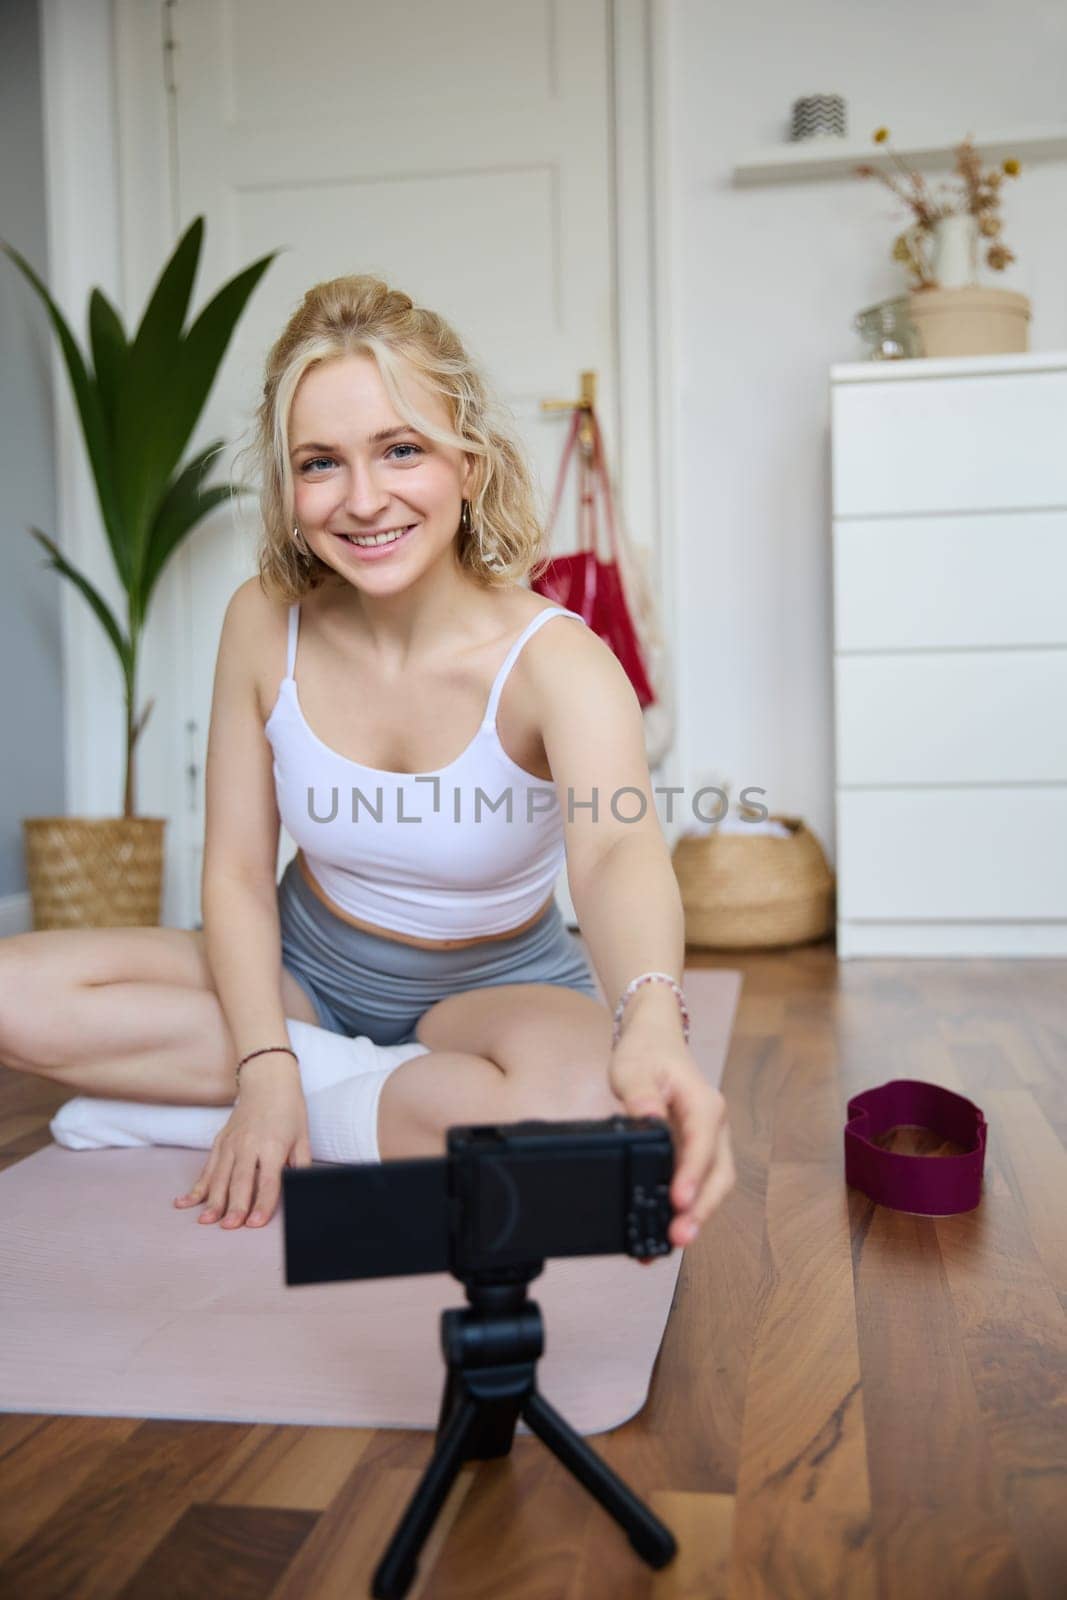 Portrait of young woman personal yoga instructor, recording workout video at home, using digital camera to vlog her exercises, using rubber mat.